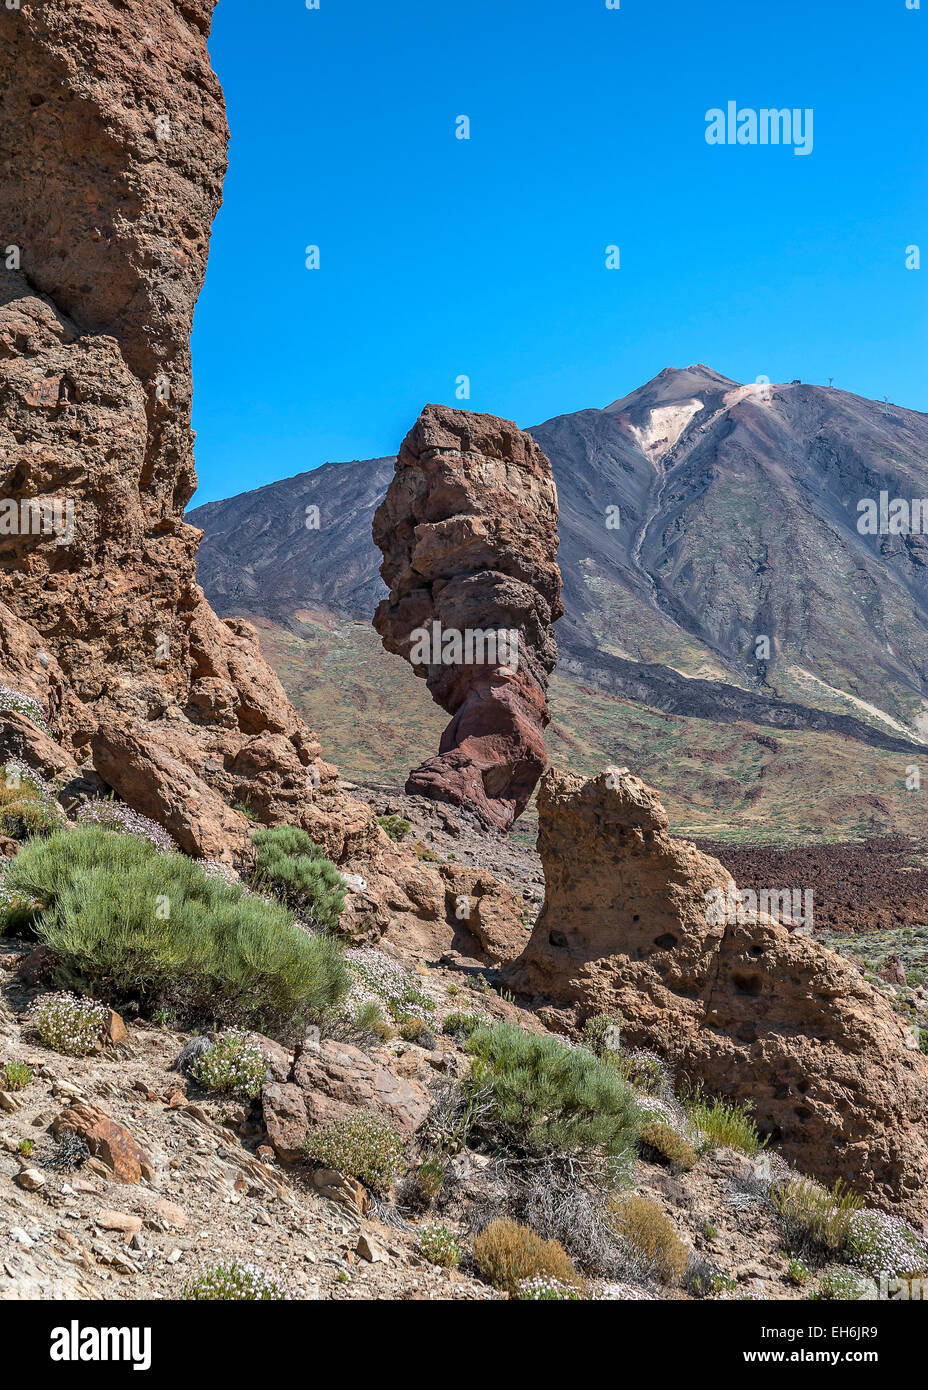 Canary Islands , Tenerife, volcano Teide. Lunar landscape of lava rocks of different colors . Rock the finger of God . Stock Photo